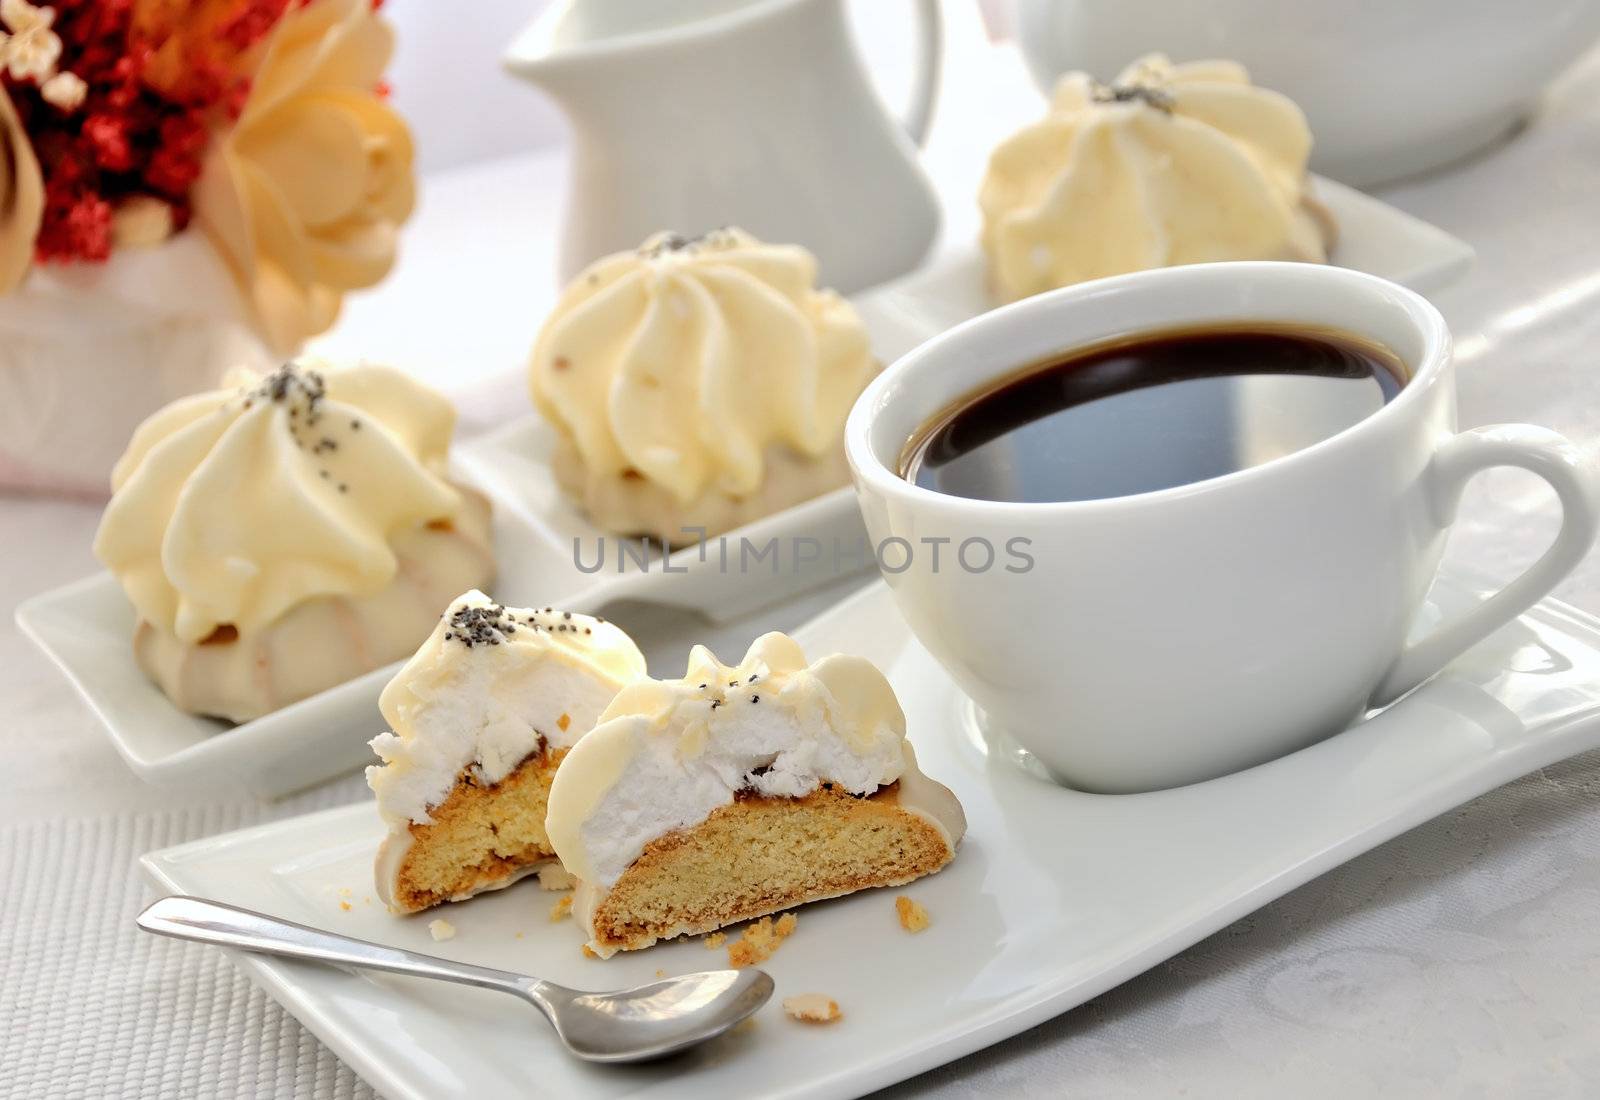 Cookies with zefirnoy filling in milk glaze with a cup of coffee